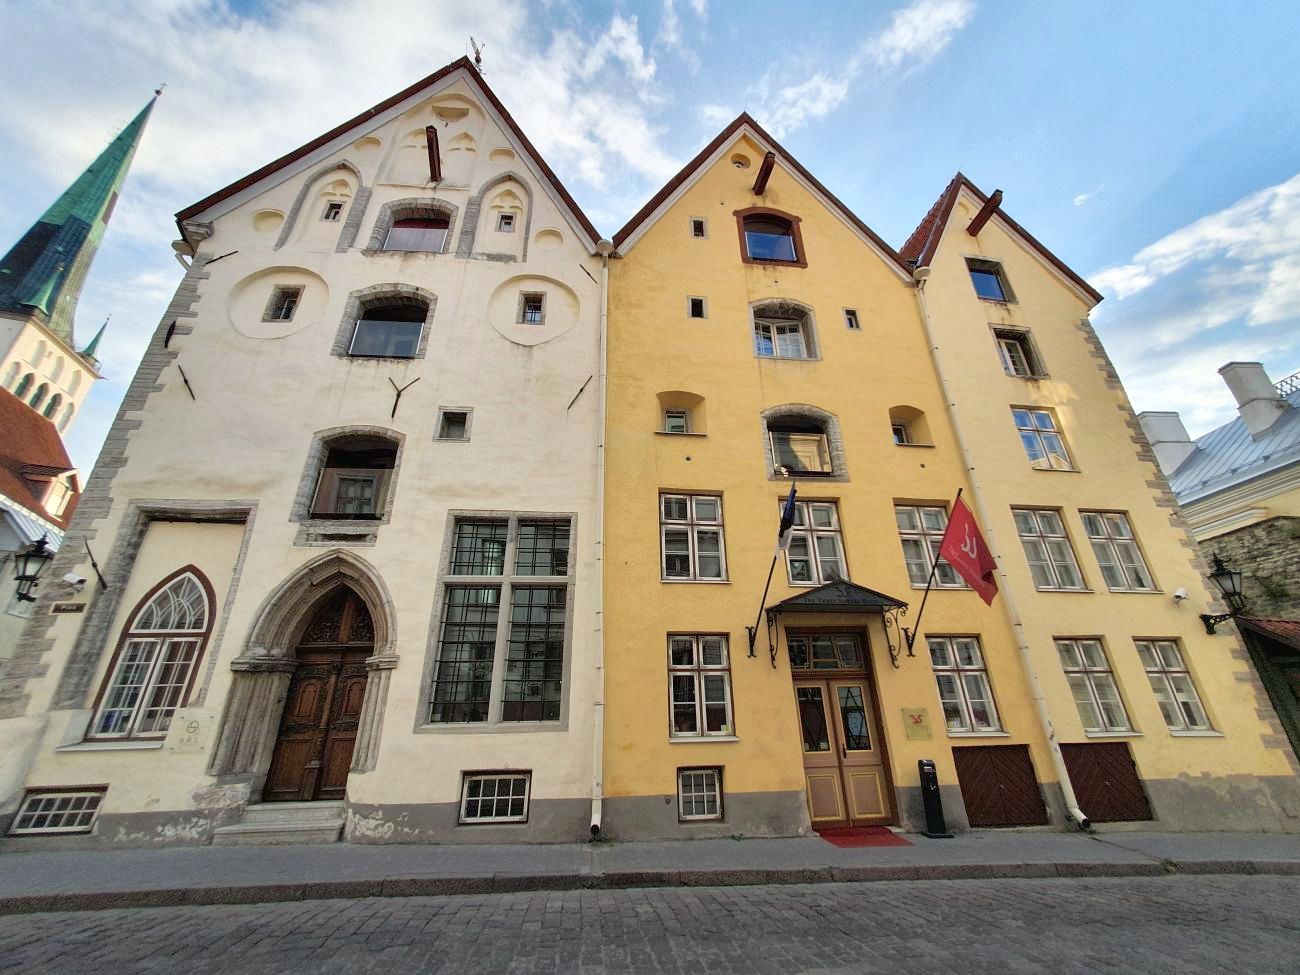 The Three Sisters is well known boutique luxury hotel in Tallinn Old Town